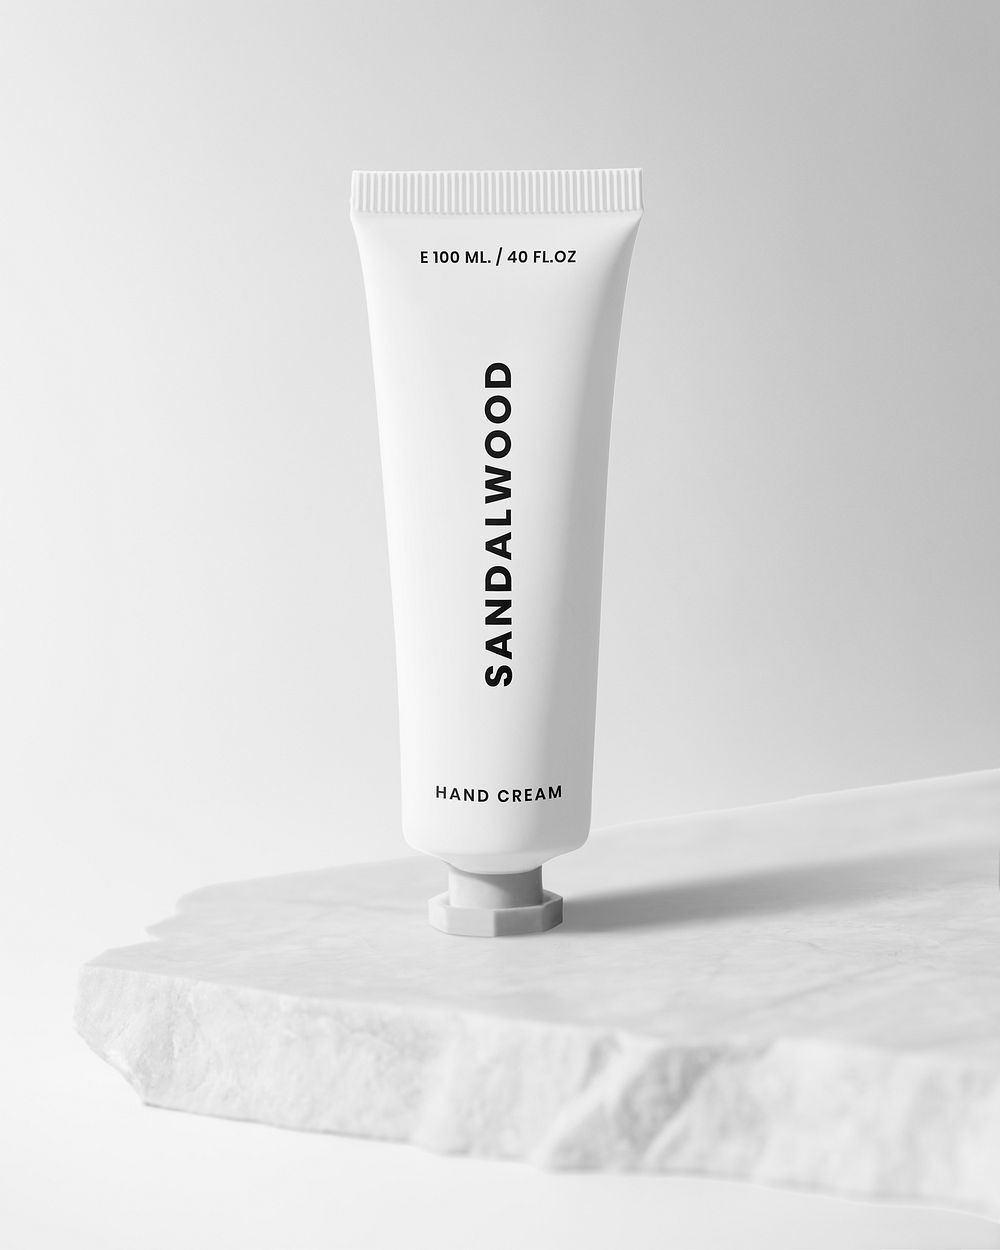 Tube mockup, beauty product psd, hand cream packaging